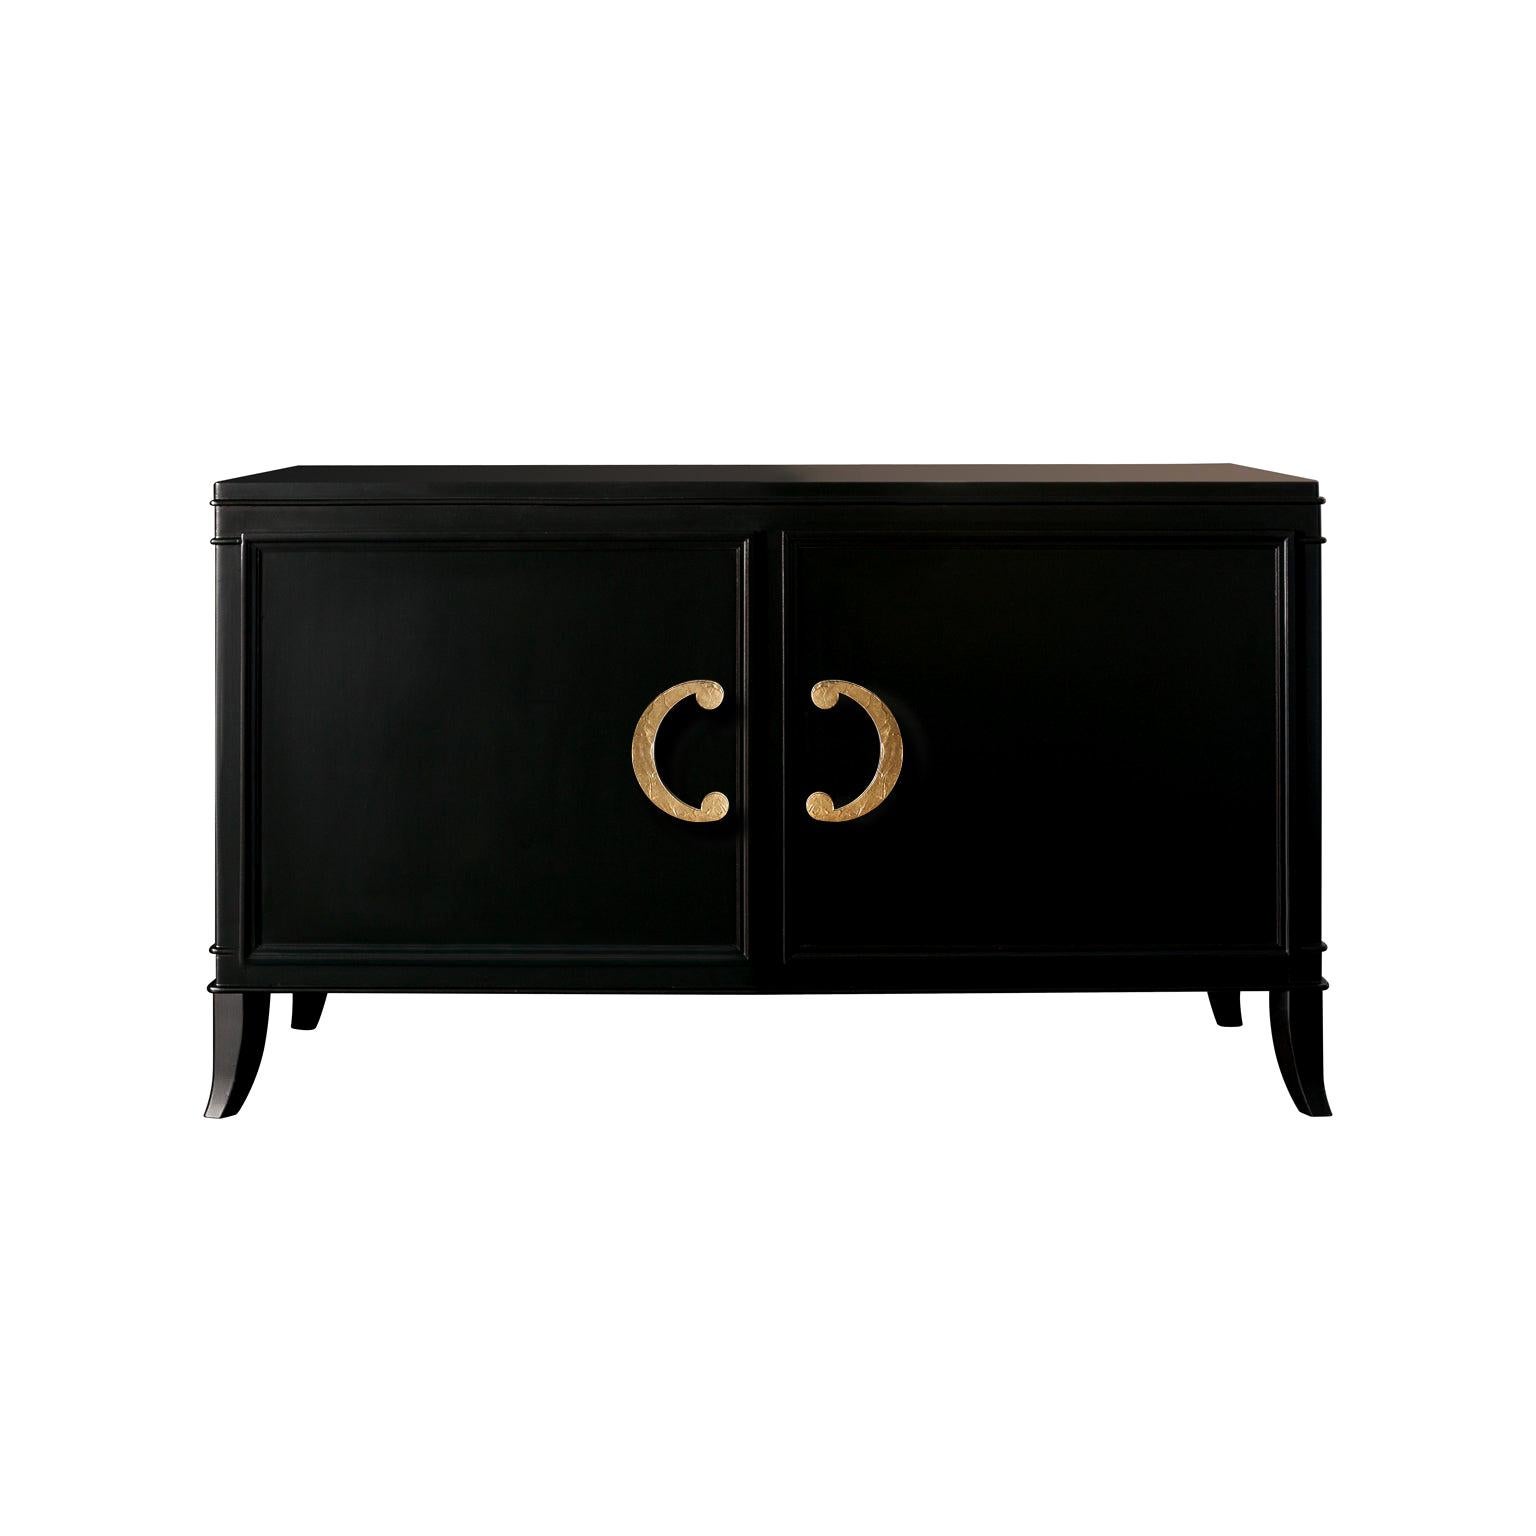 Isabella Costantini, Italy, Olimpia Sideboard Two Doors W/Crinkled Leaf Handles For Sale